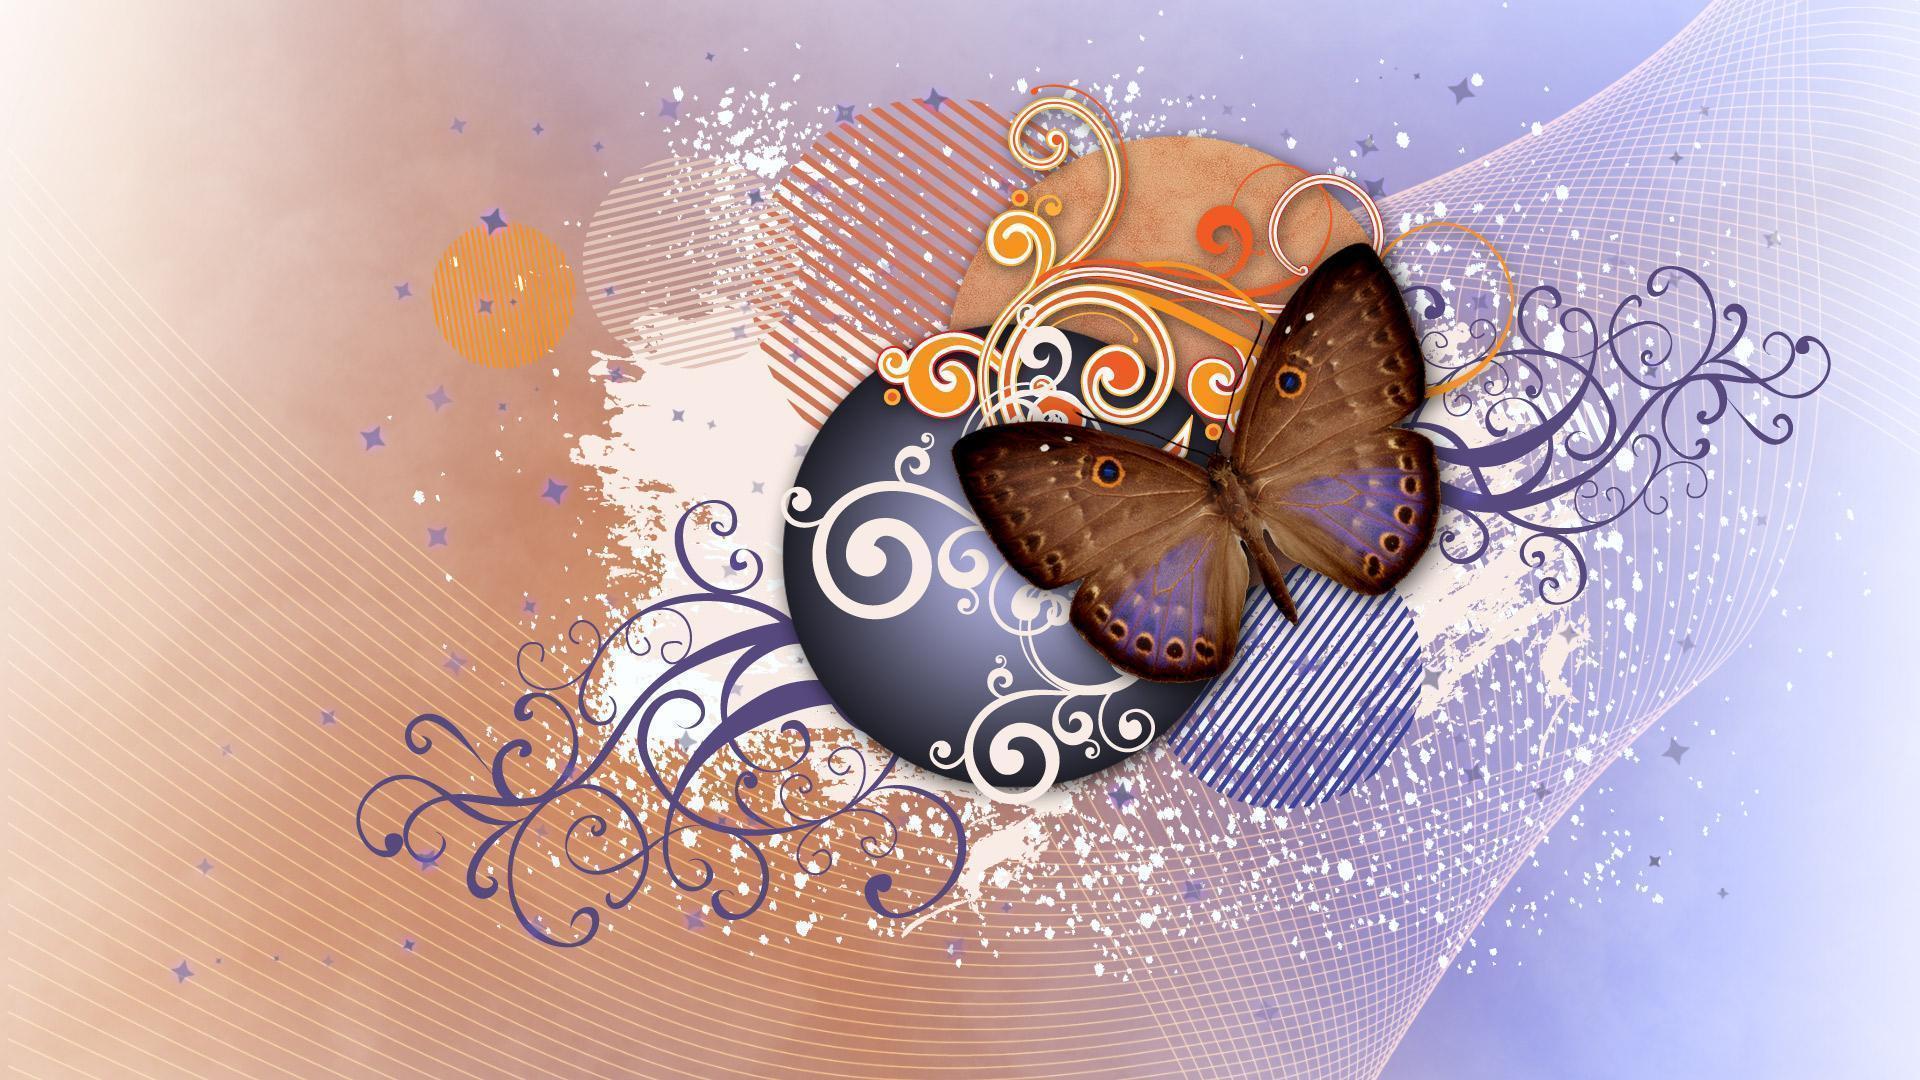 Download Abstract Butterfly Widescreen HD Wallpaper. HD